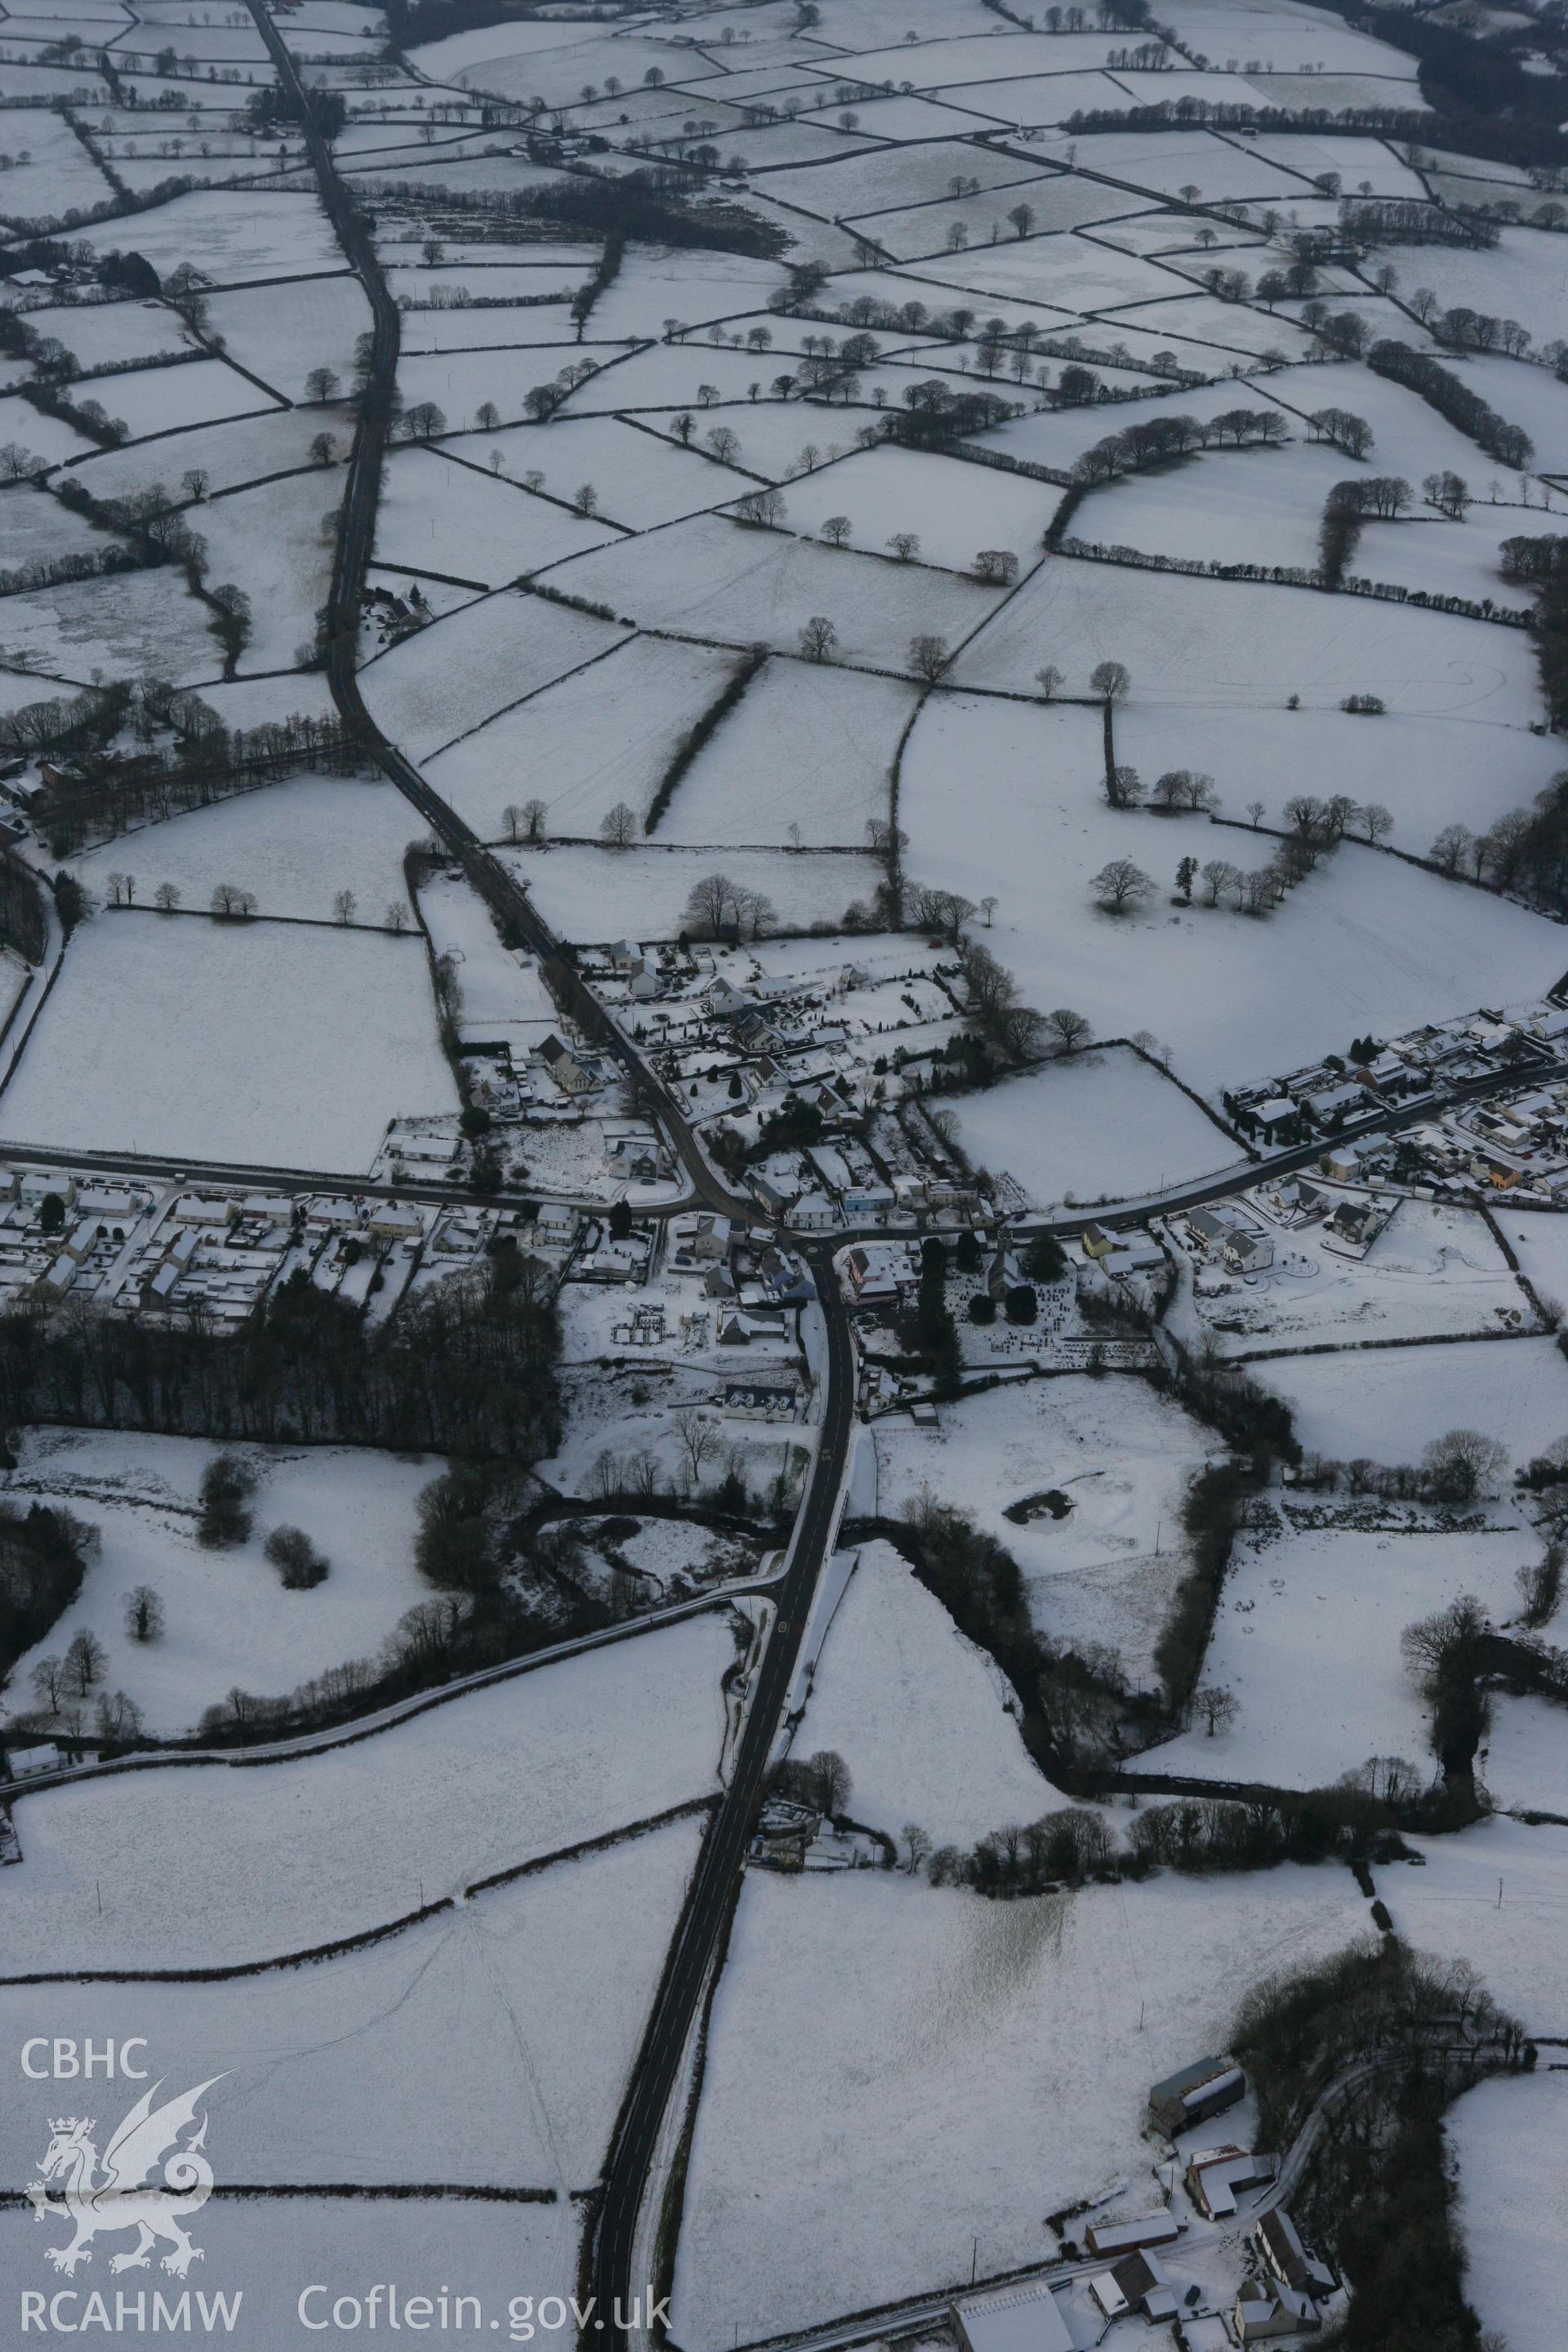 RCAHMW colour oblique photograph of Llanwnnen village. Taken by Toby Driver on 02/12/2010.